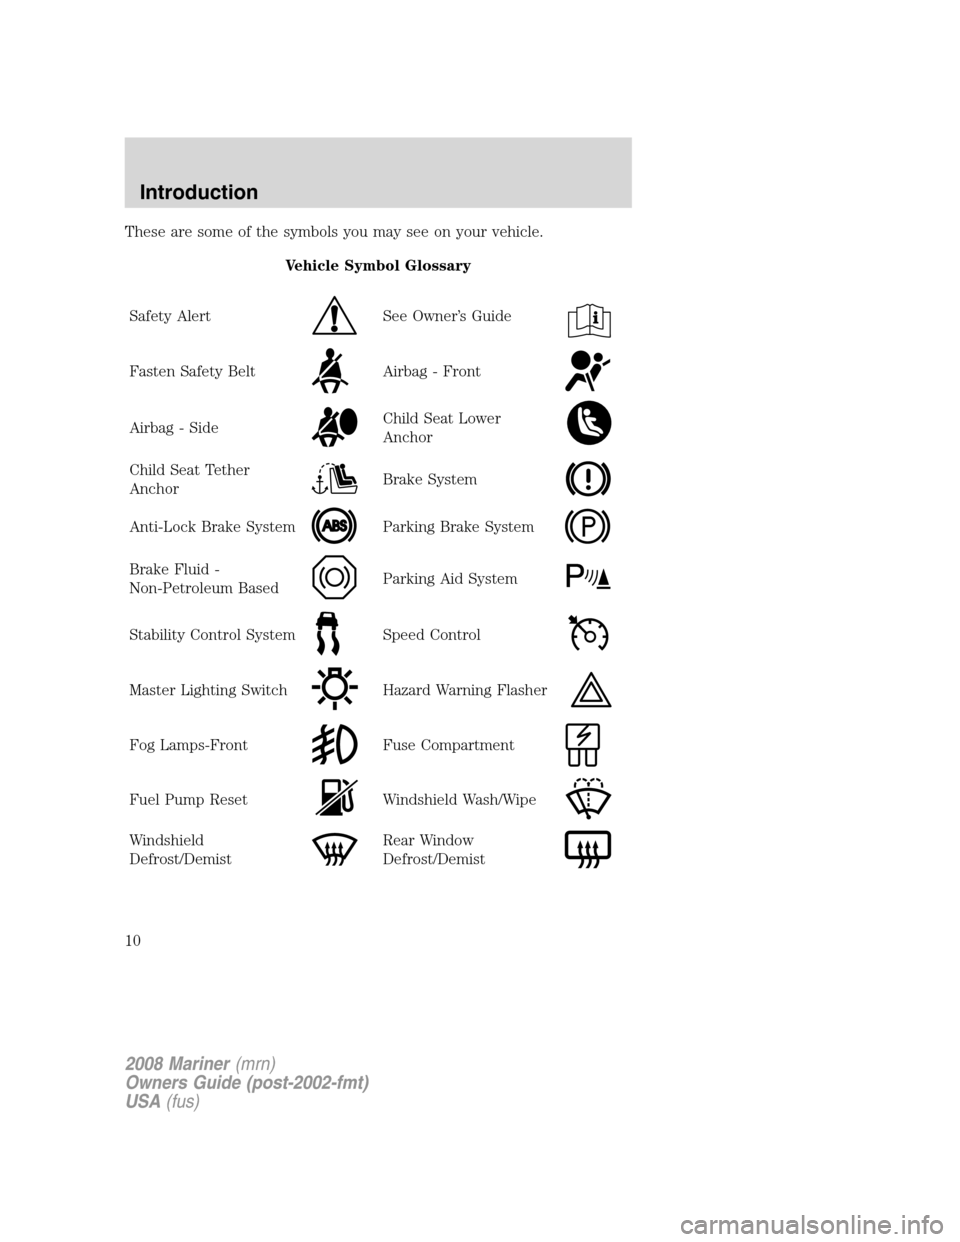 Mercury Mariner 2008  Owners Manuals These are some of the symbols you may see on your vehicle.
Vehicle Symbol Glossary
Safety Alert
See Owner’s Guide
Fasten Safety BeltAirbag - Front
Airbag - SideChild Seat Lower
Anchor
Child Seat Tet